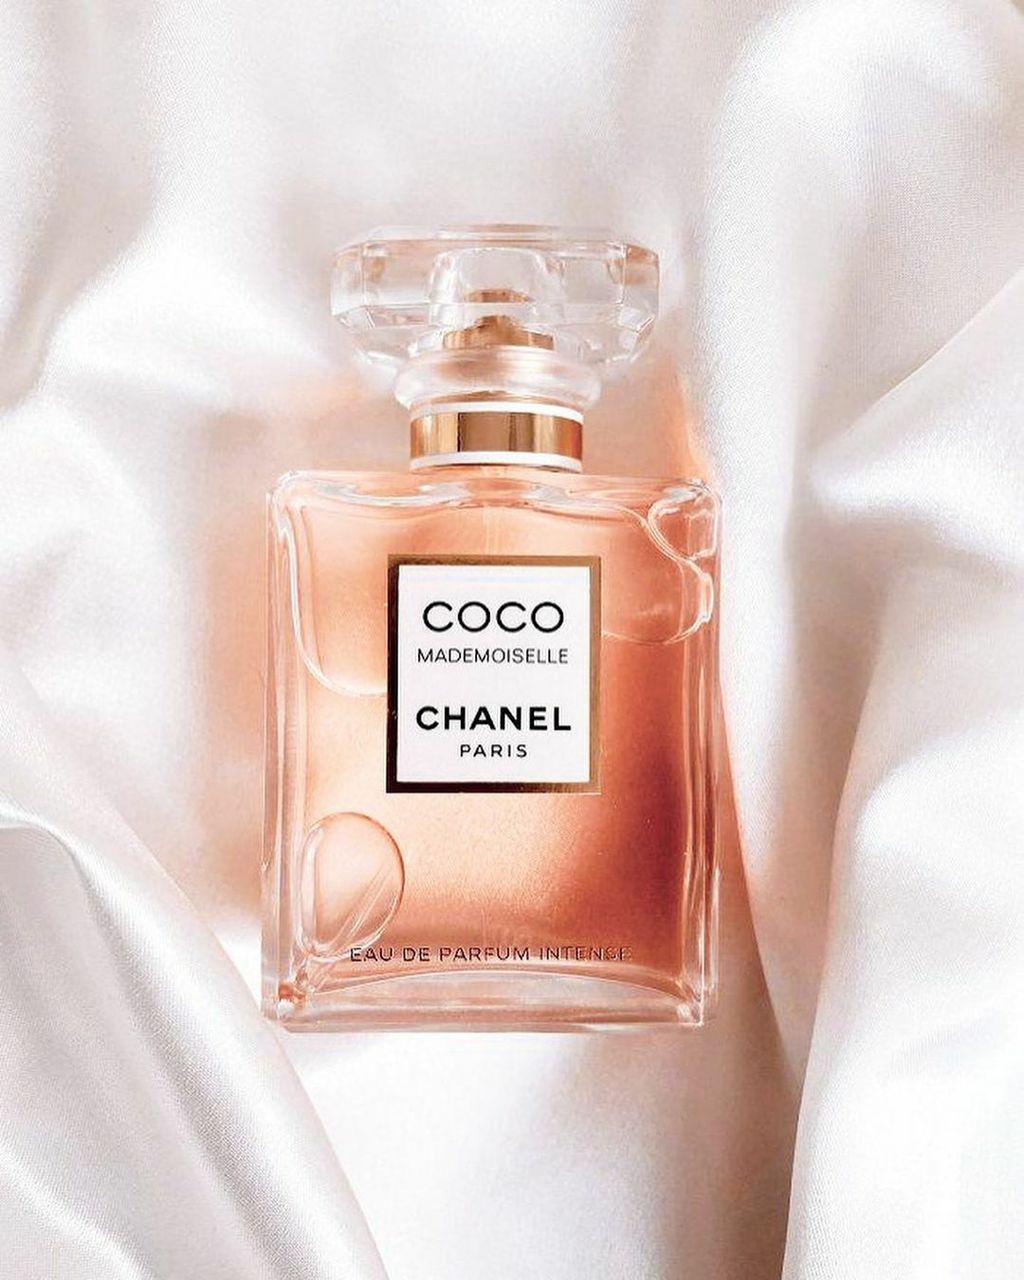 Chanel Coco Mademoiselle Intense EDP Spray 100ml Mens Other